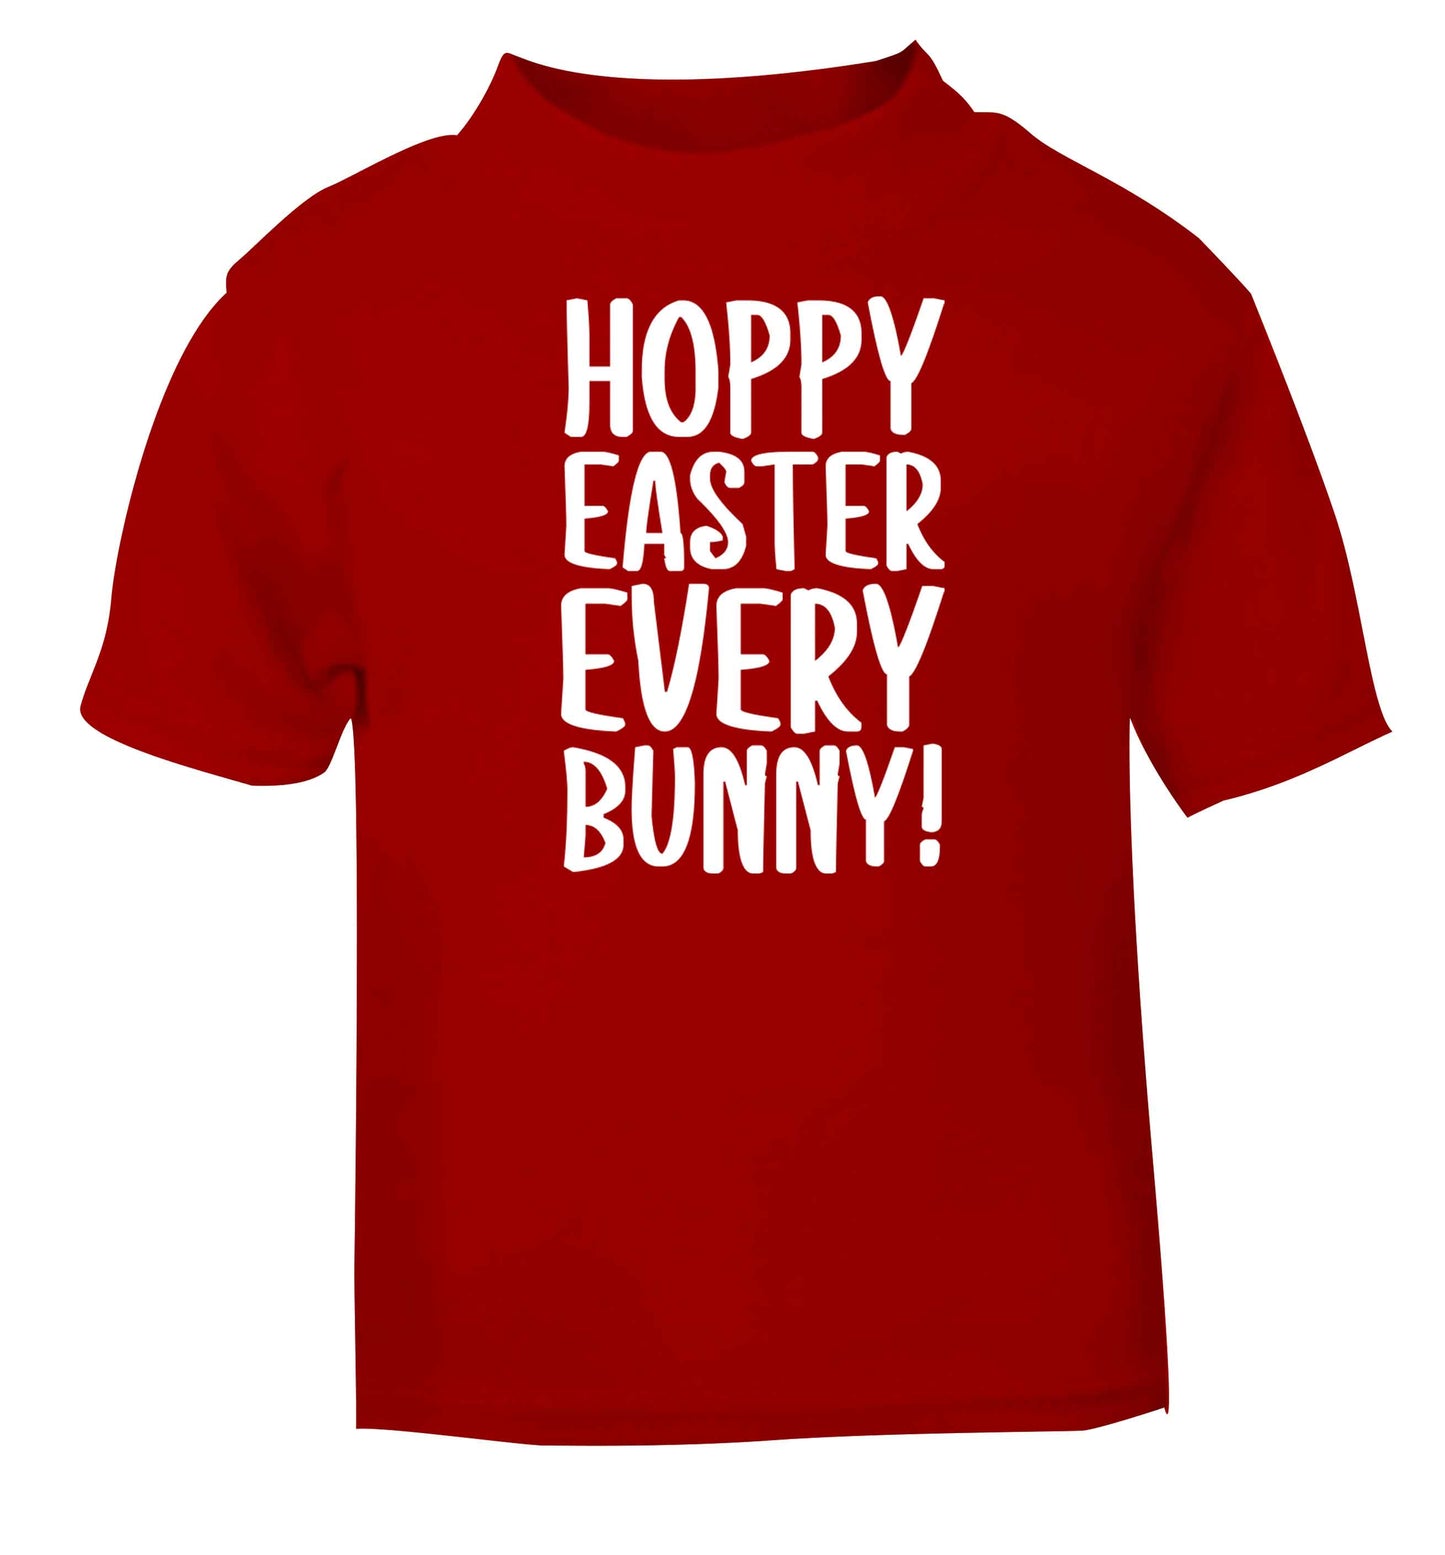 Hoppy Easter every bunny! red baby toddler Tshirt 2 Years